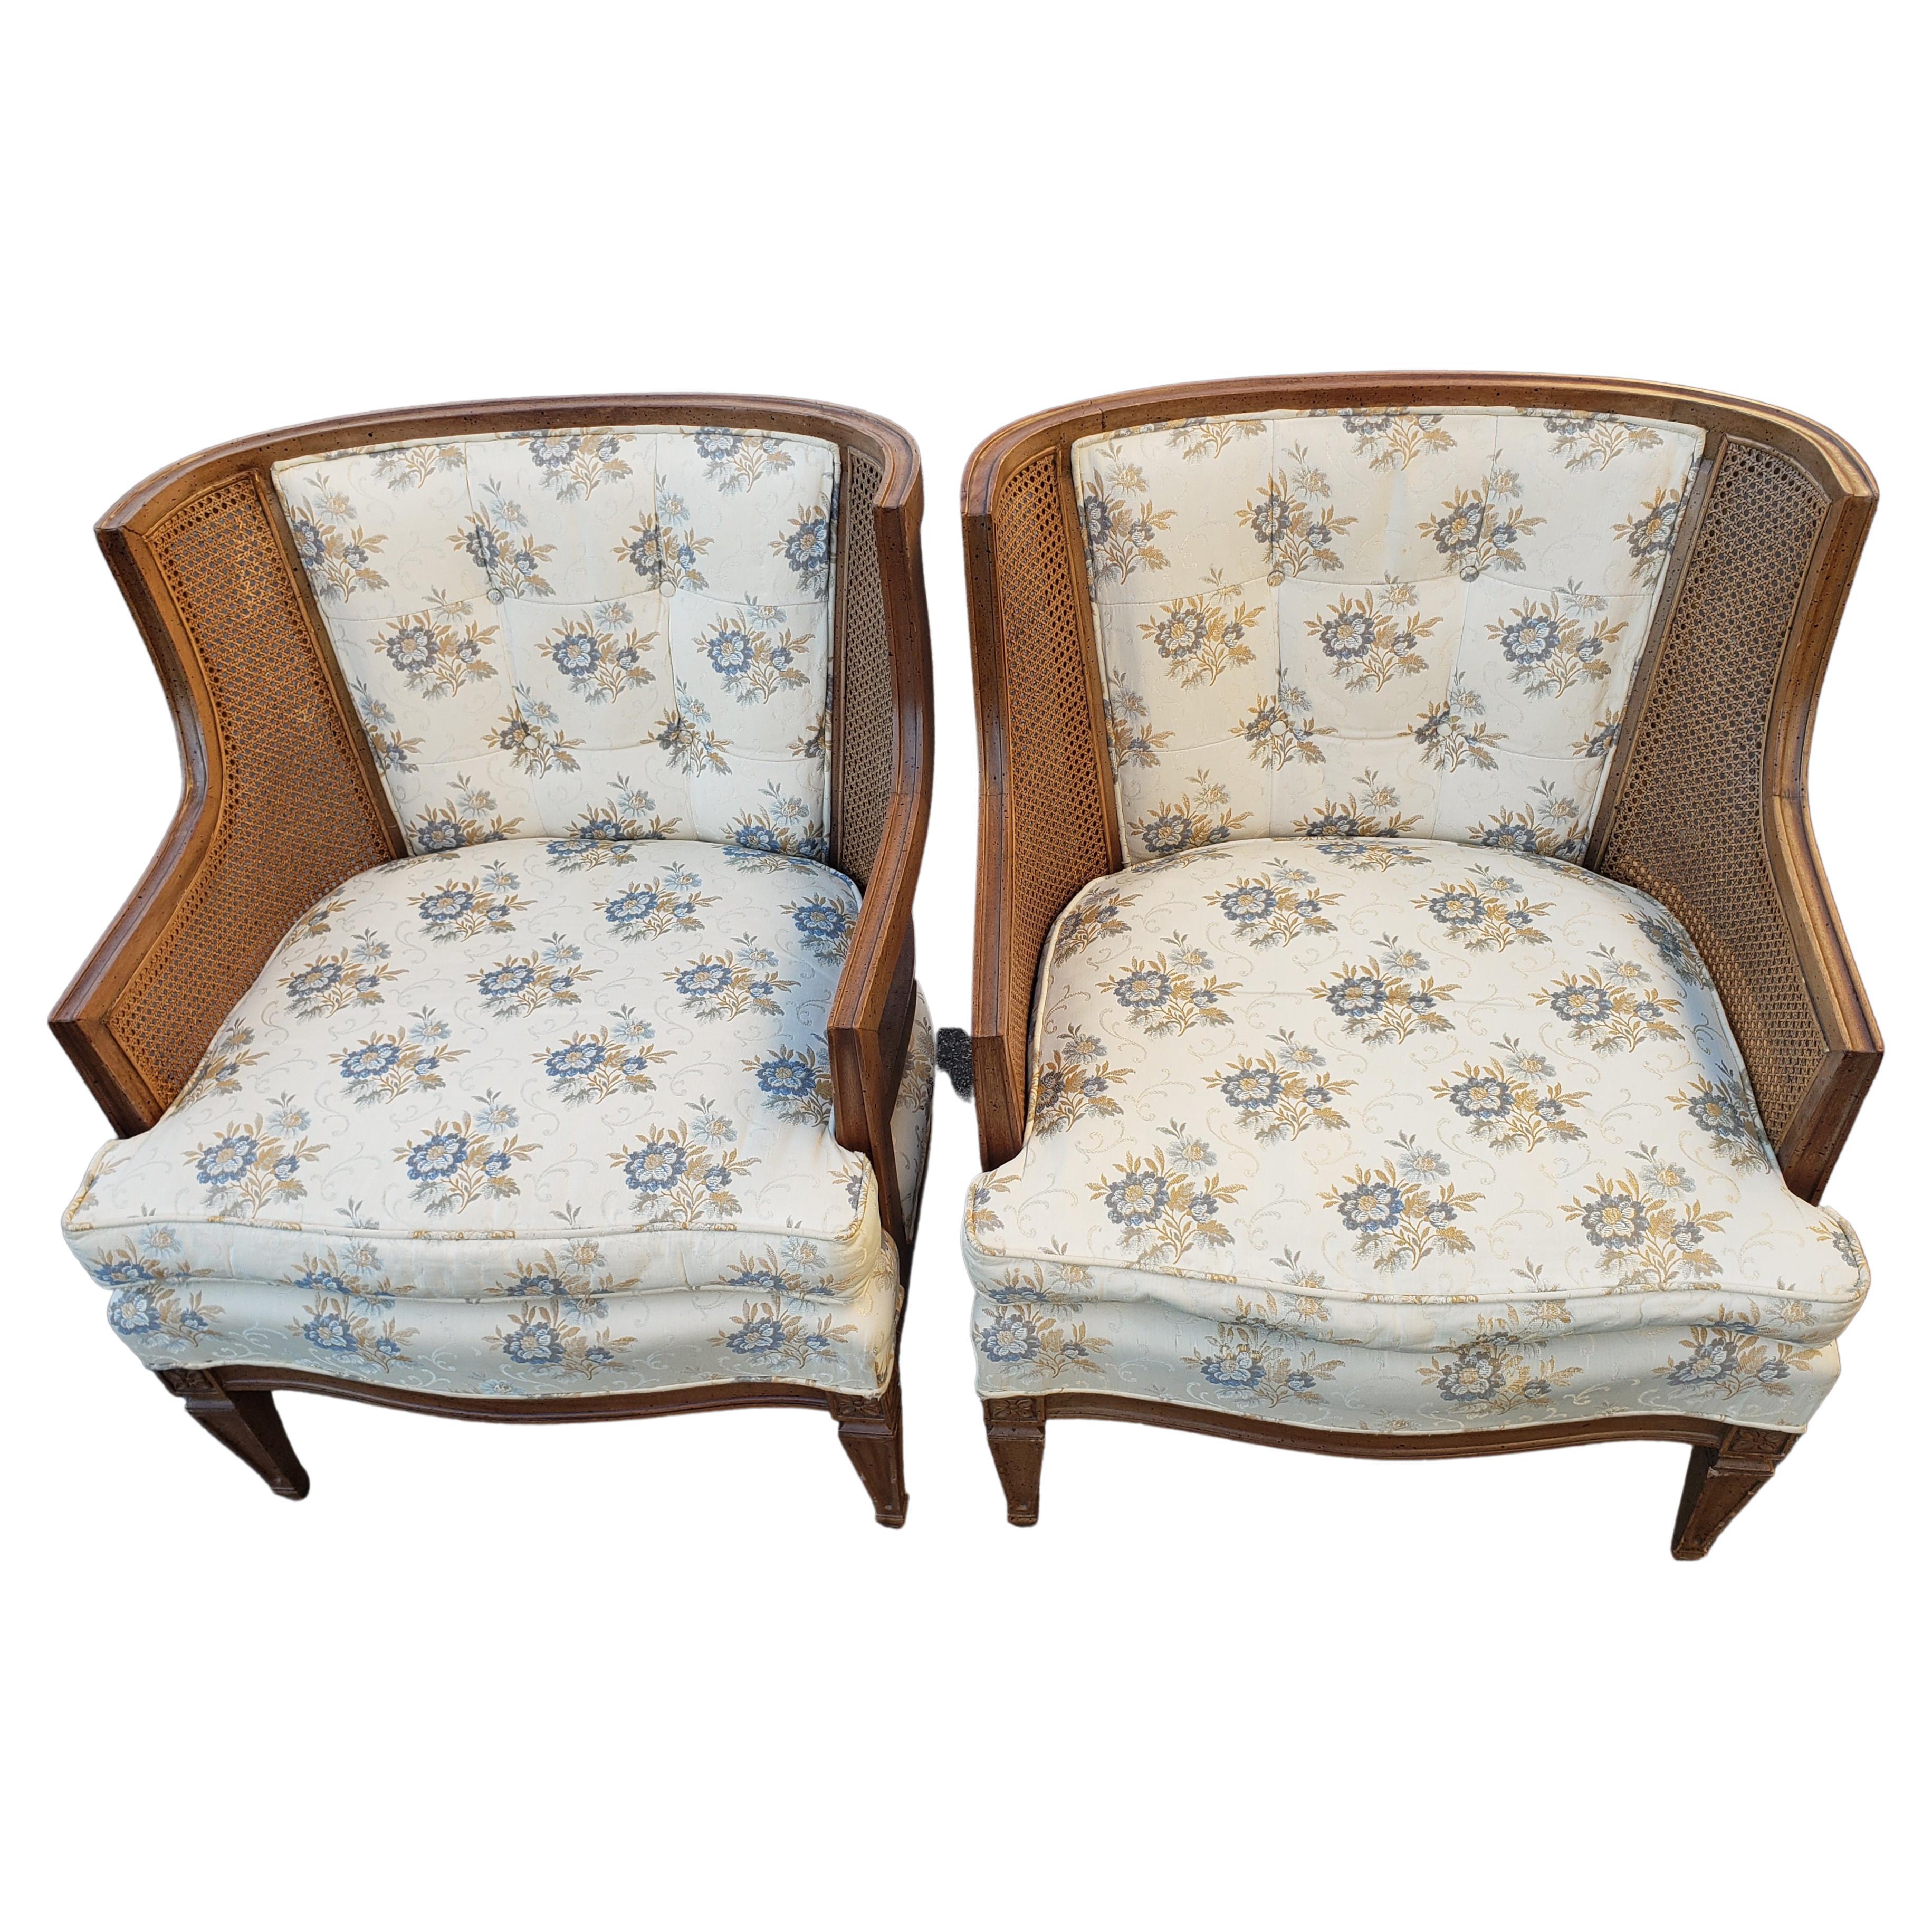 Hibriten French Bergere walnut cane upholstered chairs. Good vintage condition. Enjoy the comfort of classic French Bergere seating by Hibriten. Very comfortable seating with a mixture of natural hair seat (horse mane and hog hair) and other poly